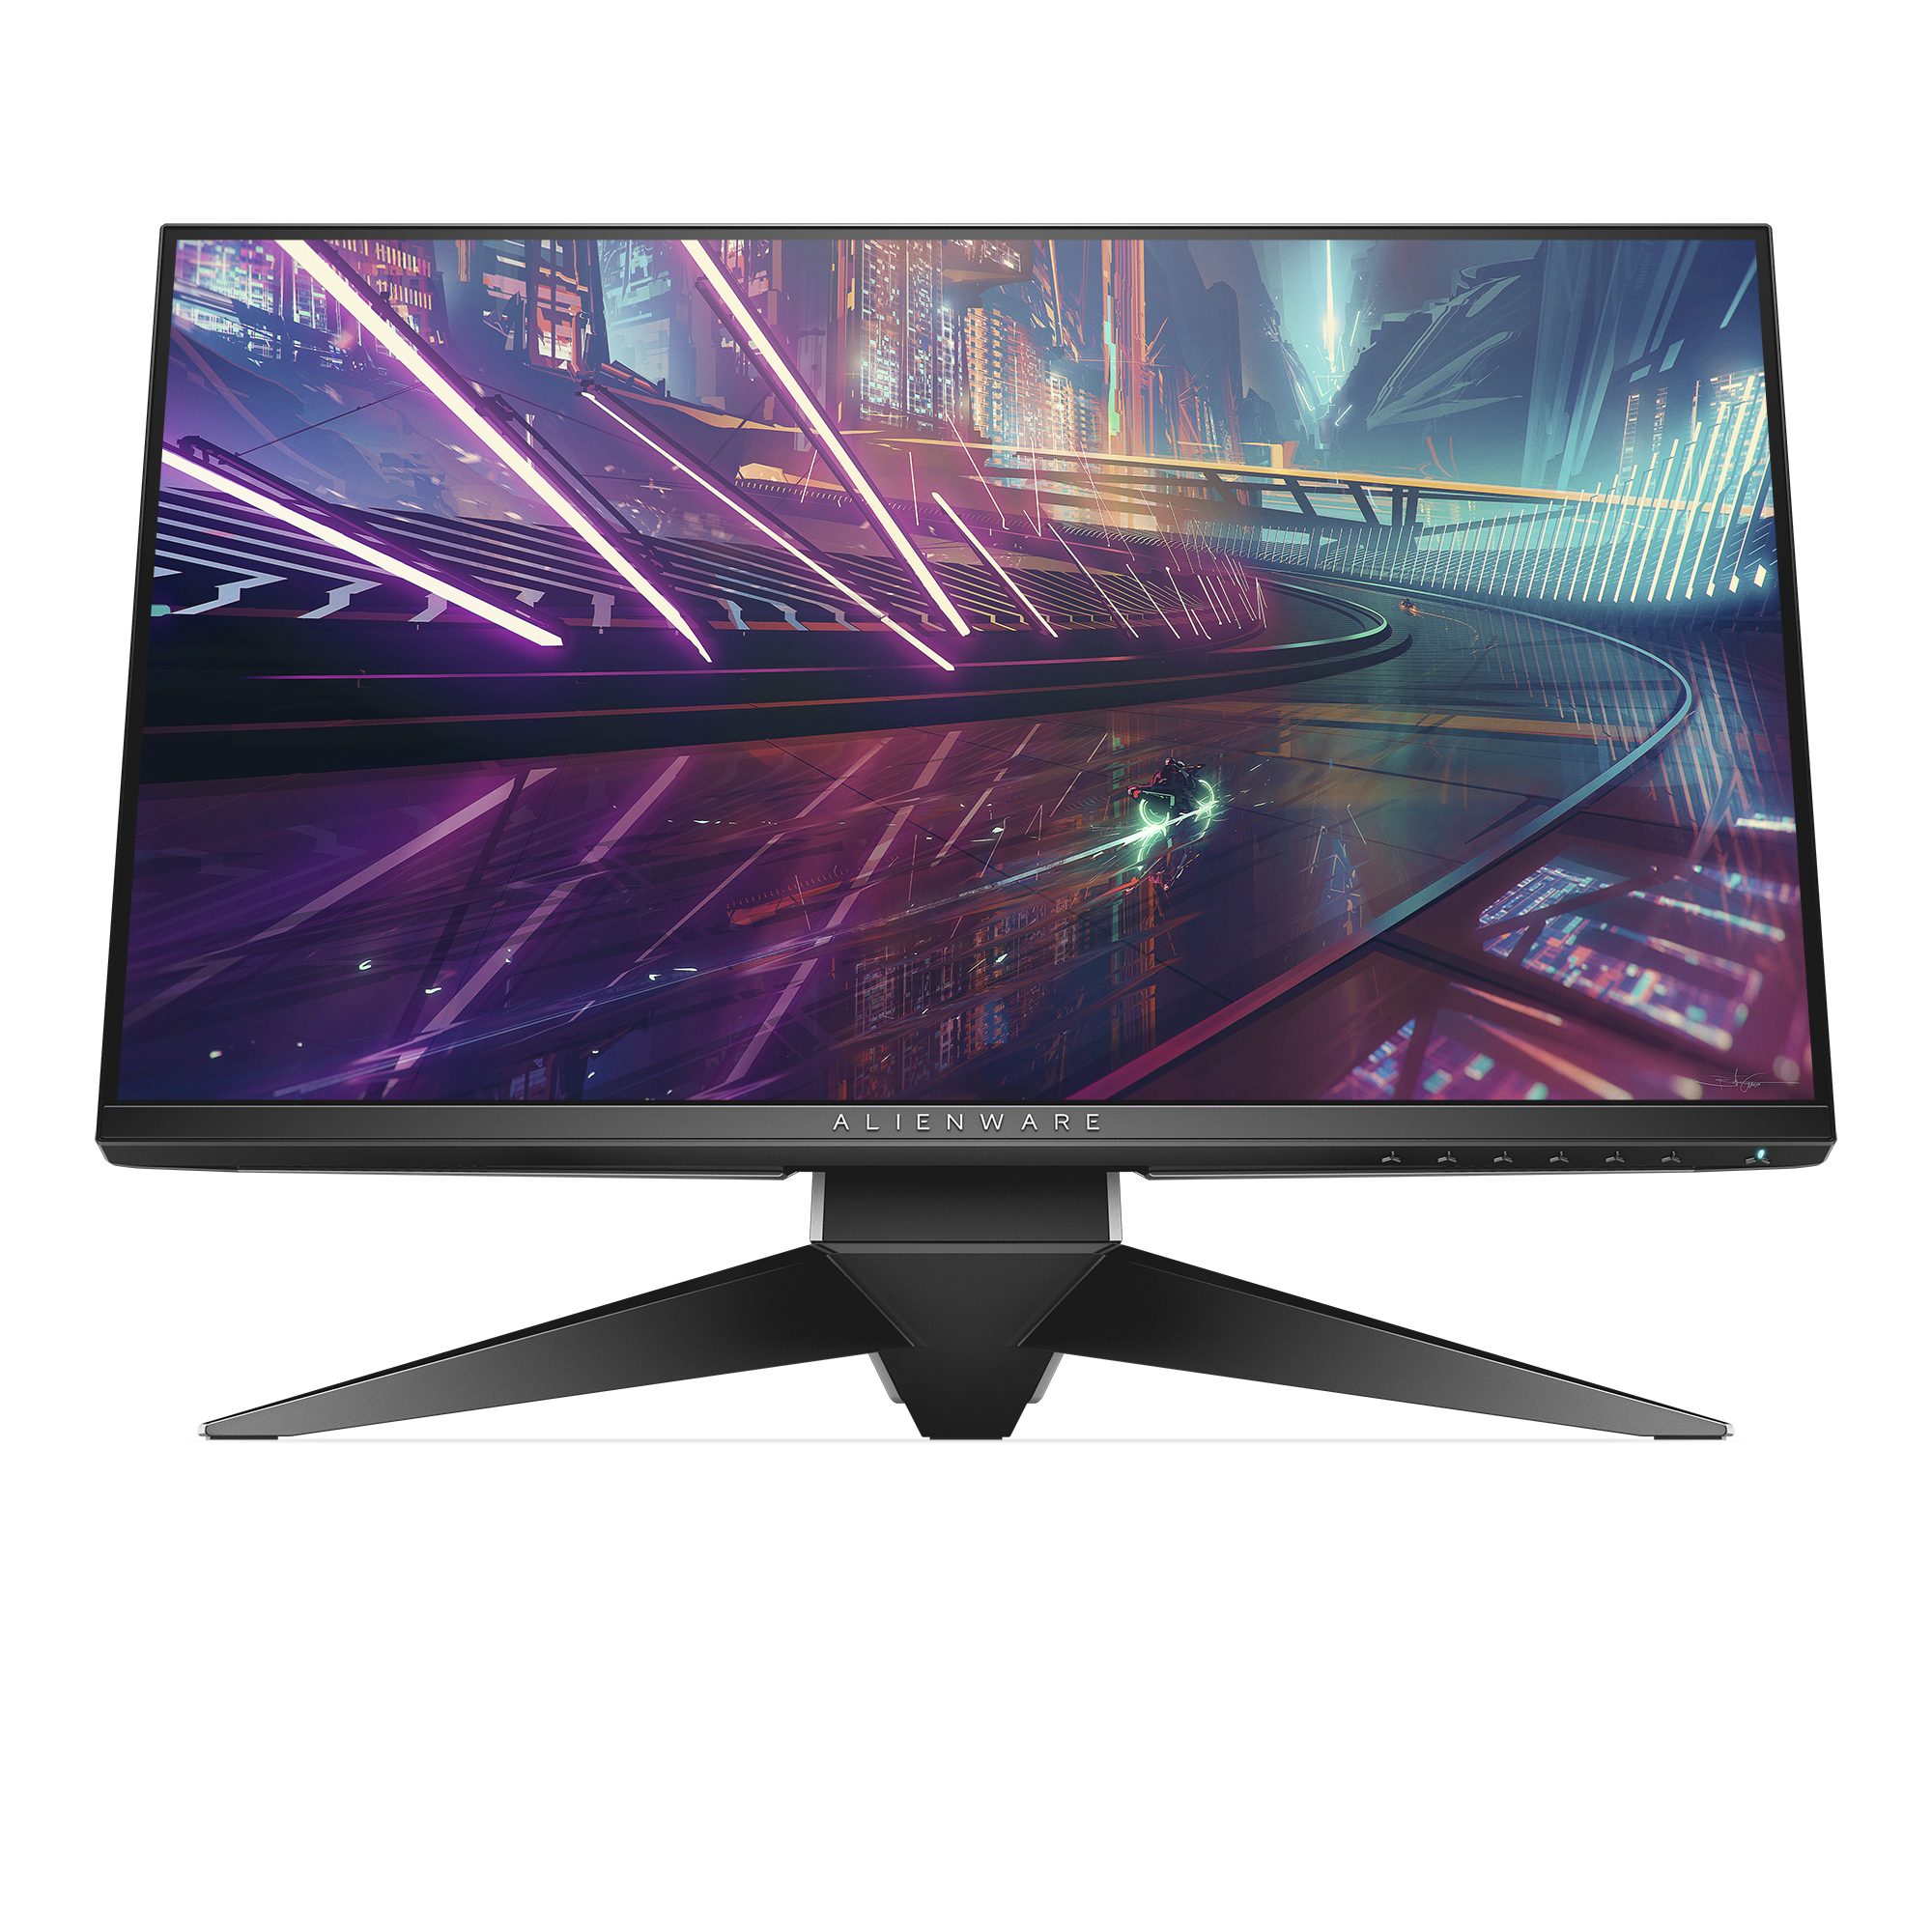 Alienware 25" 1920x1080 HDMI DP USB 3.0 240hz 1ms NVIDIA G-SYNC HD LCD Gaming monitor - AW2518H - image 3 of 11